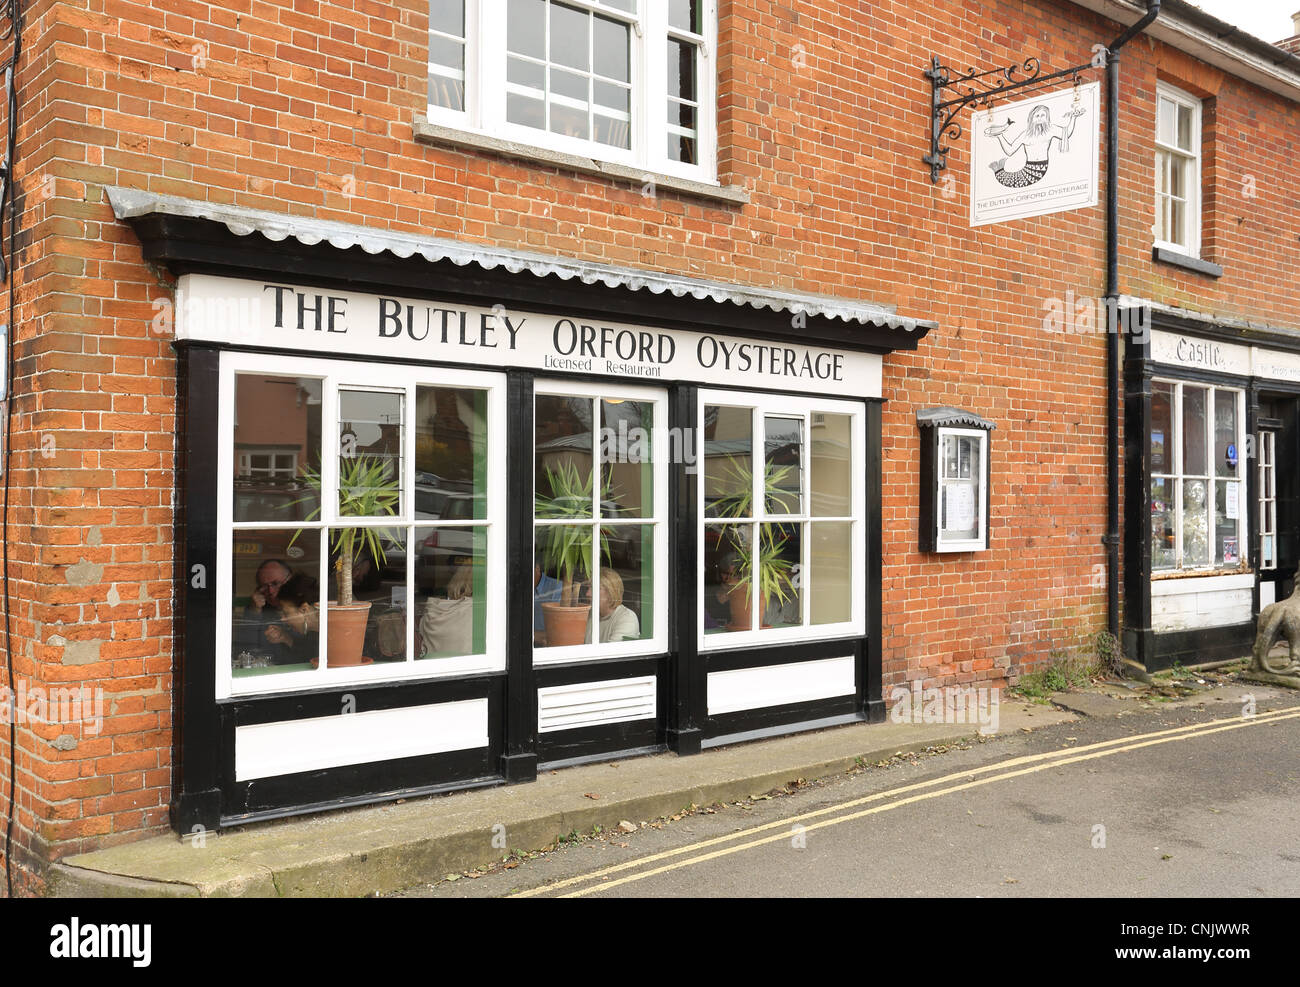 The Butley Orford Oysterage, Seafood Restaurant, Orford Suffolk UK, 2012 Stock Photo